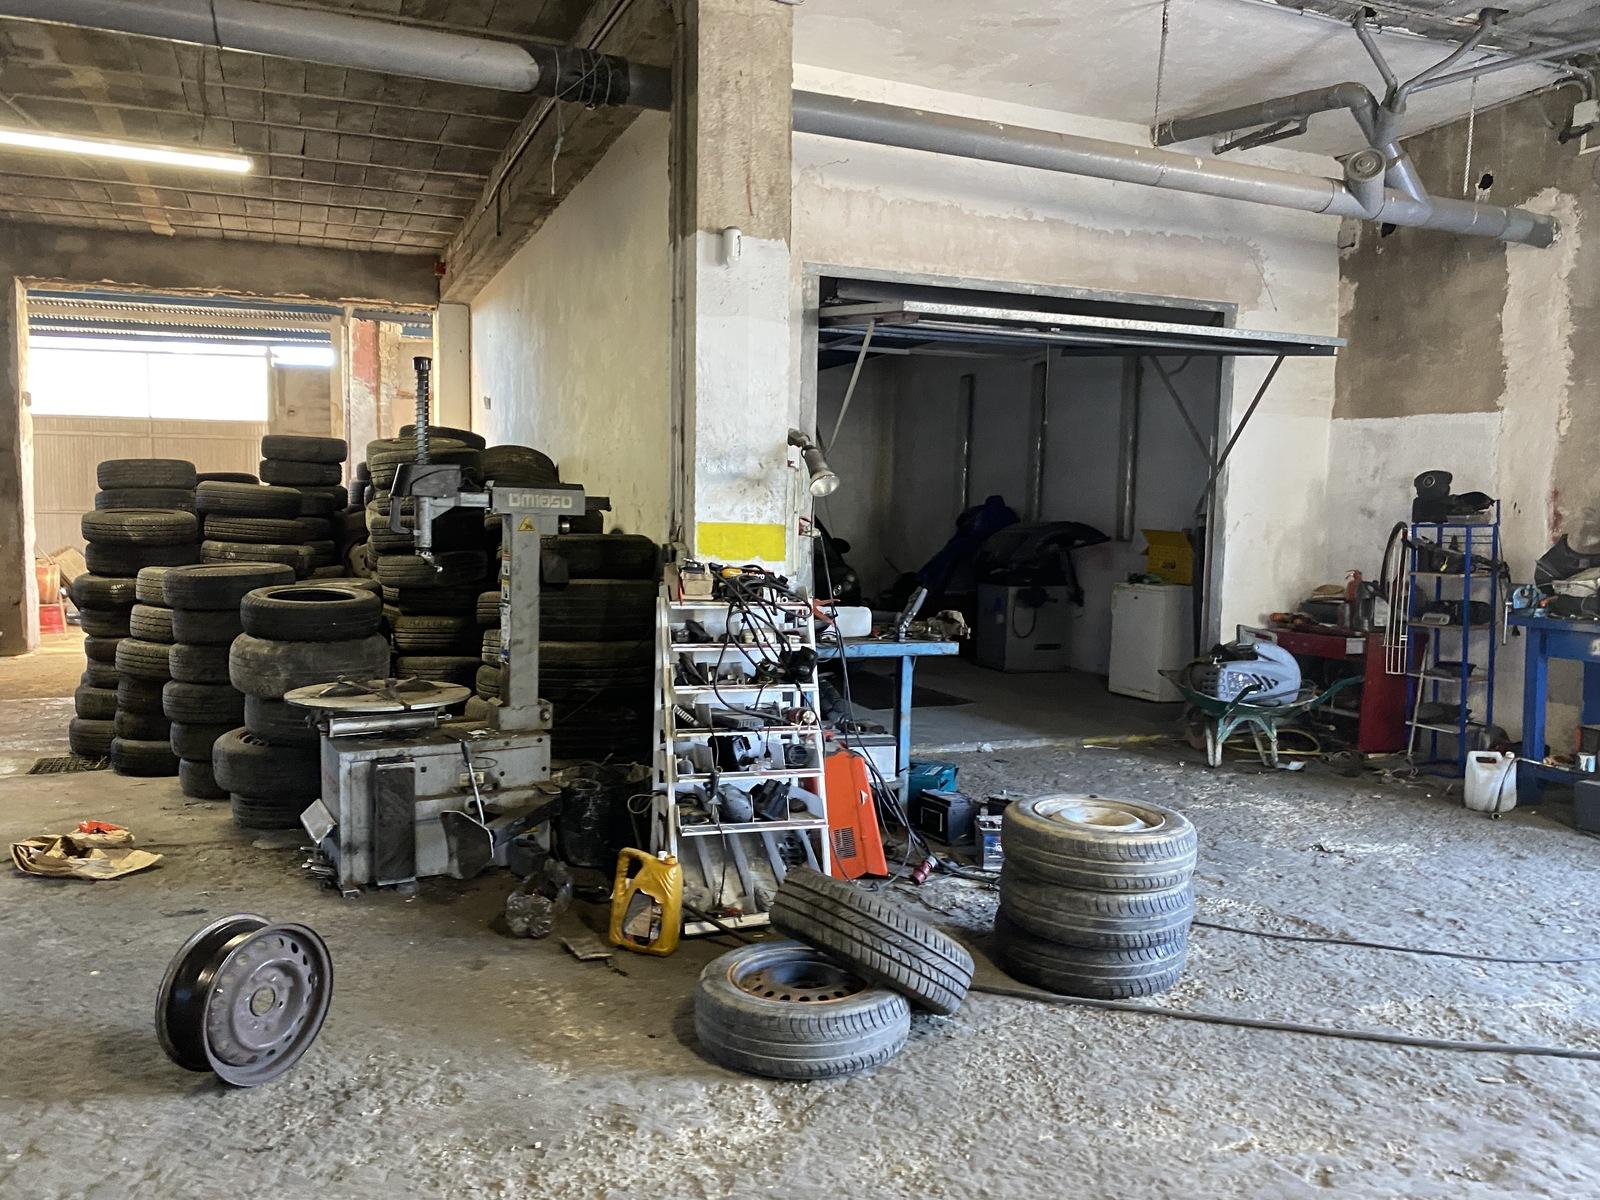 Business opportunity! Authorised Vehicle Treatment/Scrapyard Centre